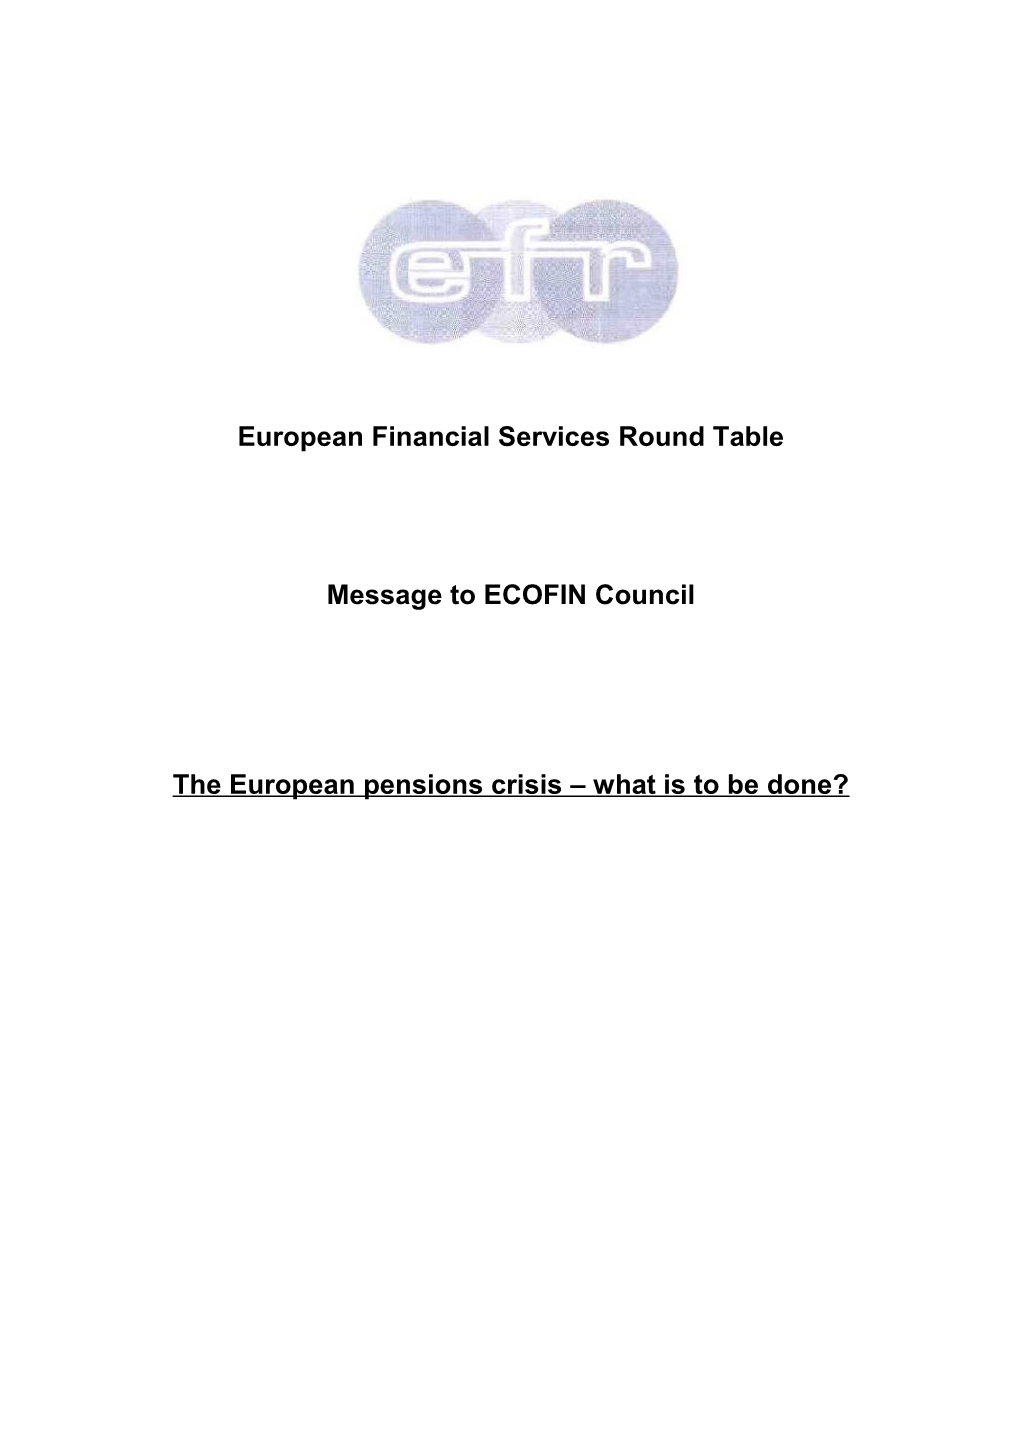 Message to ECOFIN Council on 7 March 2002